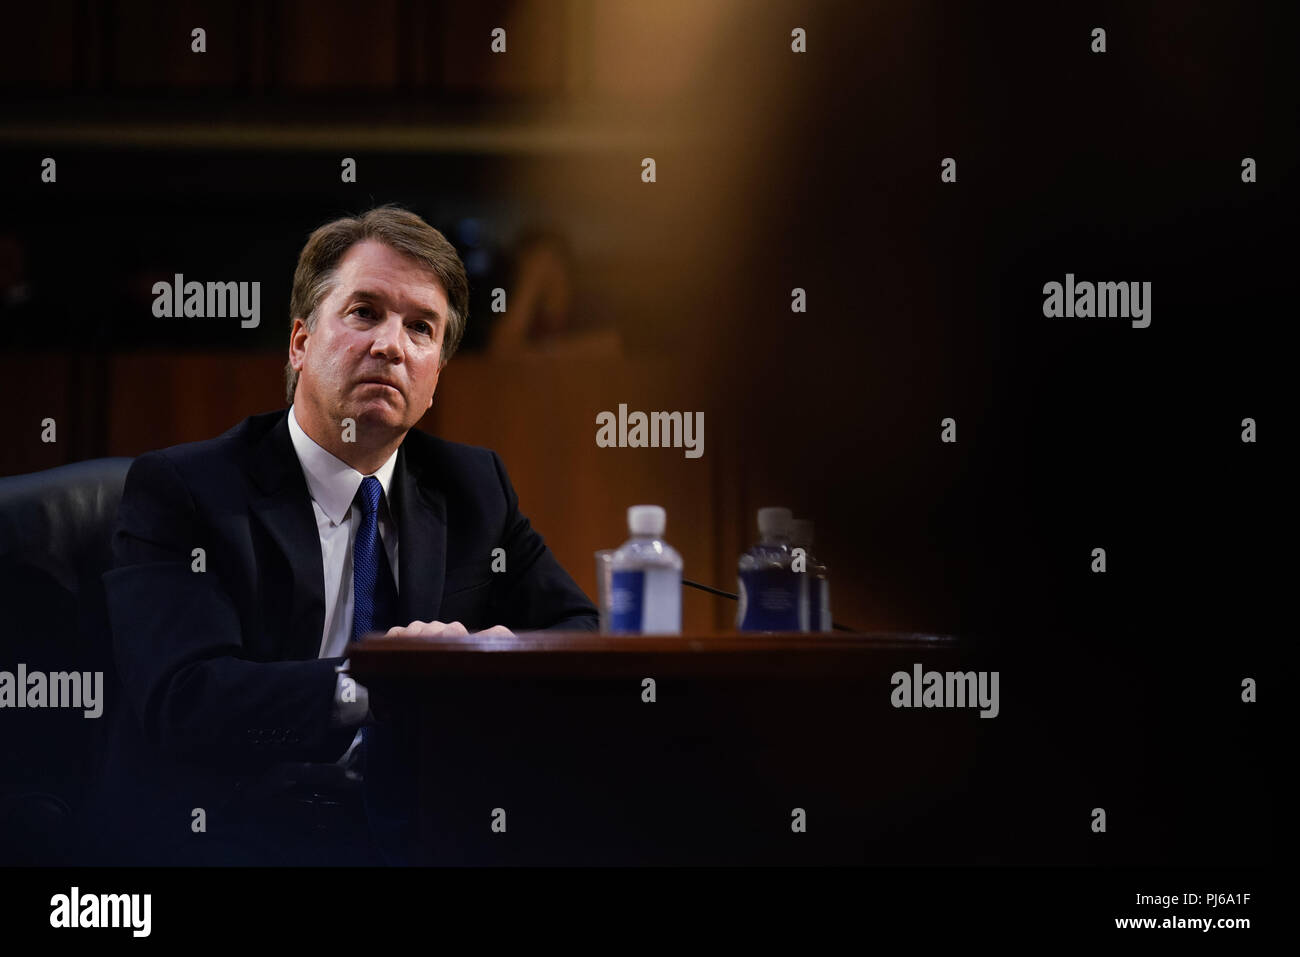 Washington, DC, USA. 4th Sep, 2018. U.S. Supreme Court Associate Justice nominee Brett Kavanaugh listens to opening statements during his confirmation hearing before the Senate Judiciary Committee in the Hart Senate Office Building in Washington, DC on Sept 4, 2018. Credit: Ken Cedeno/ZUMA Wire/Alamy Live News Stock Photo